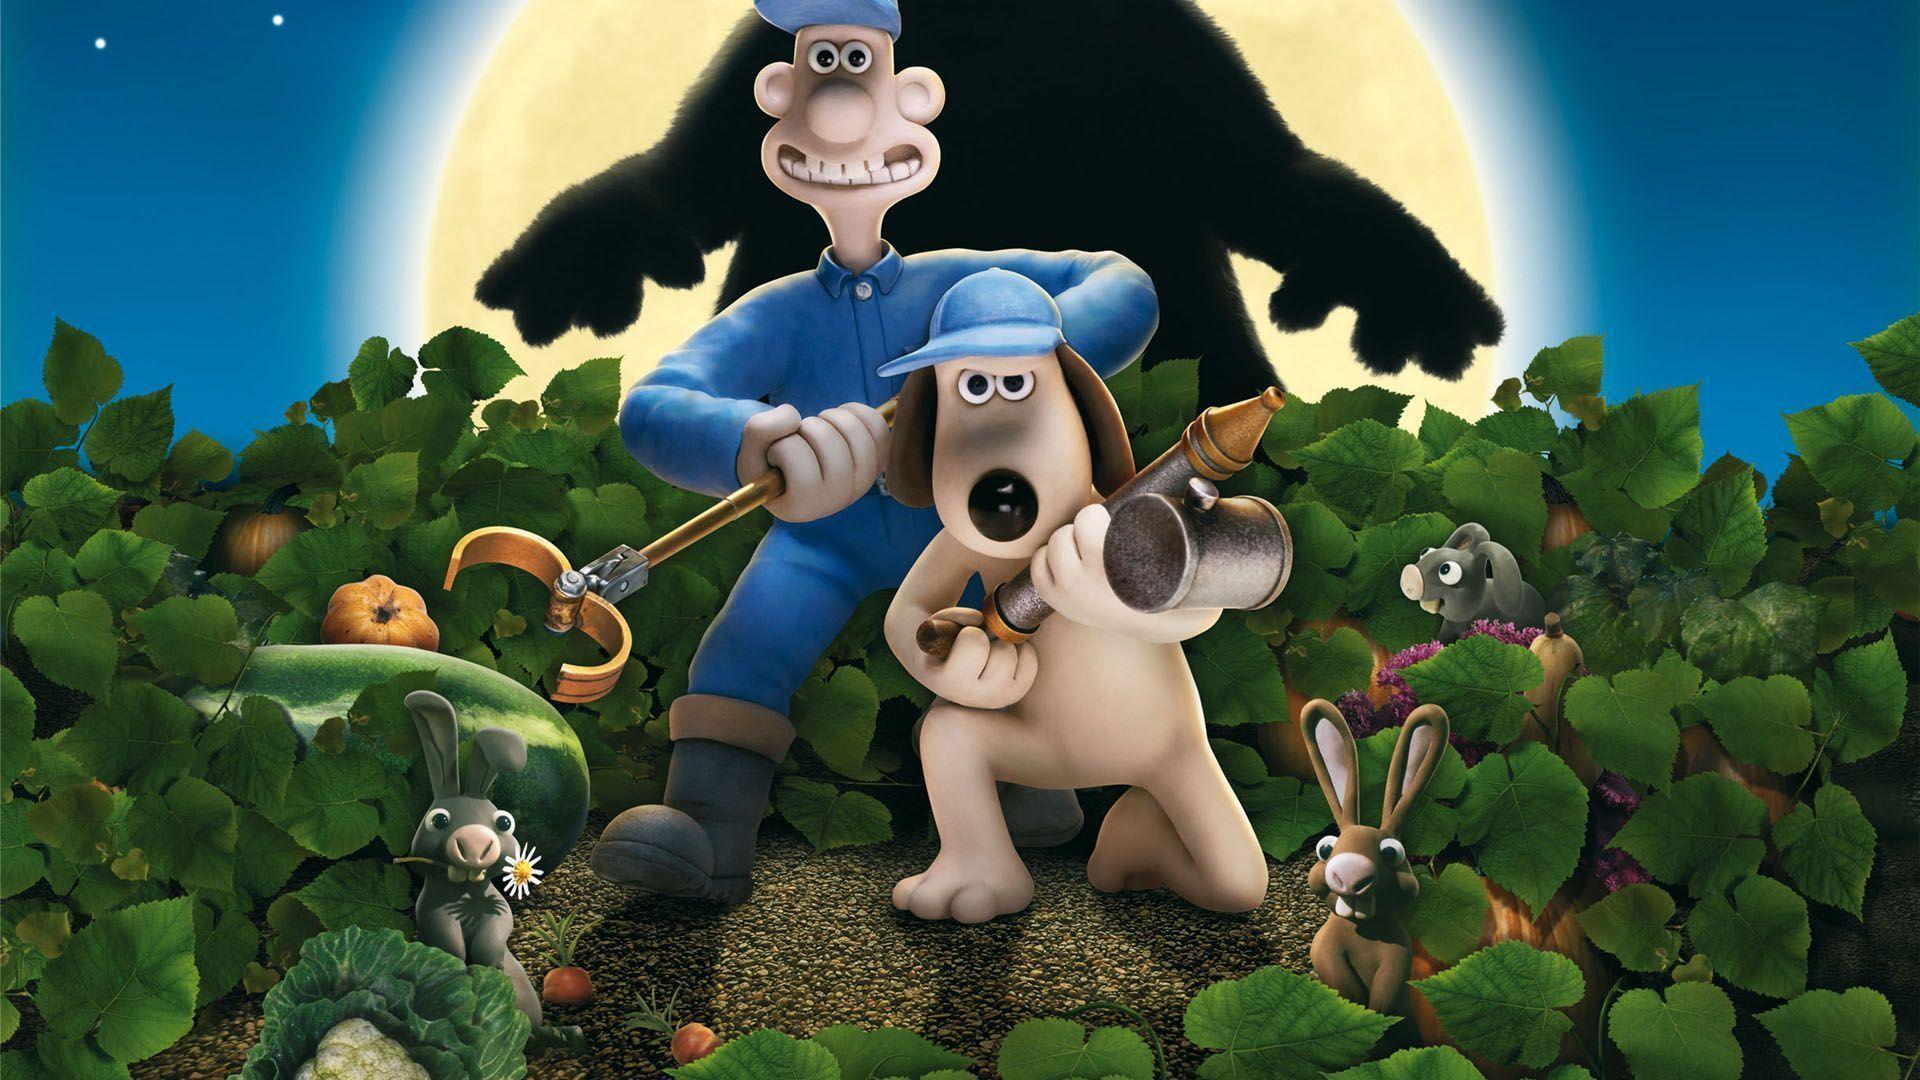 image For > Wallace And Gromit The Curse Of The Were Rabbit Poster